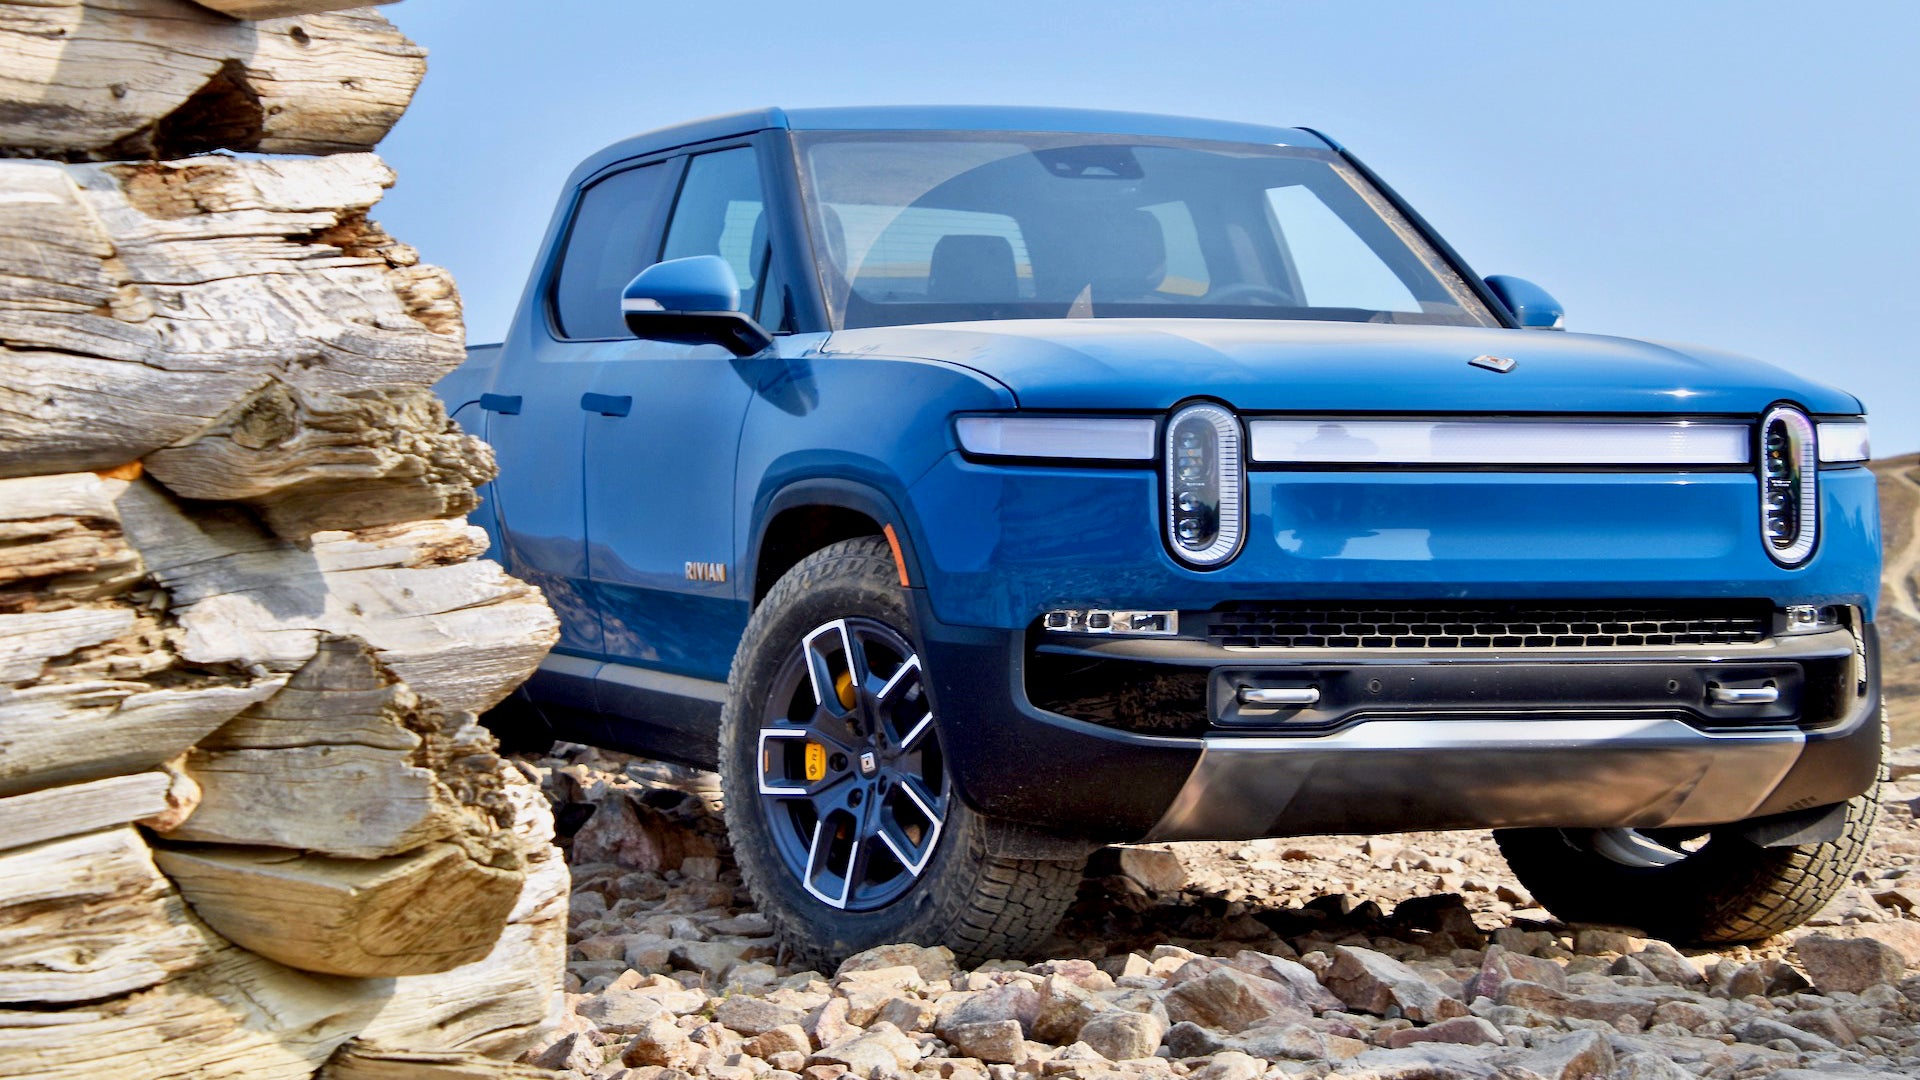 Try Out the Rivian R1T with a First Mile Test Drive - Experience Unmatched Acceleration & Comfort!